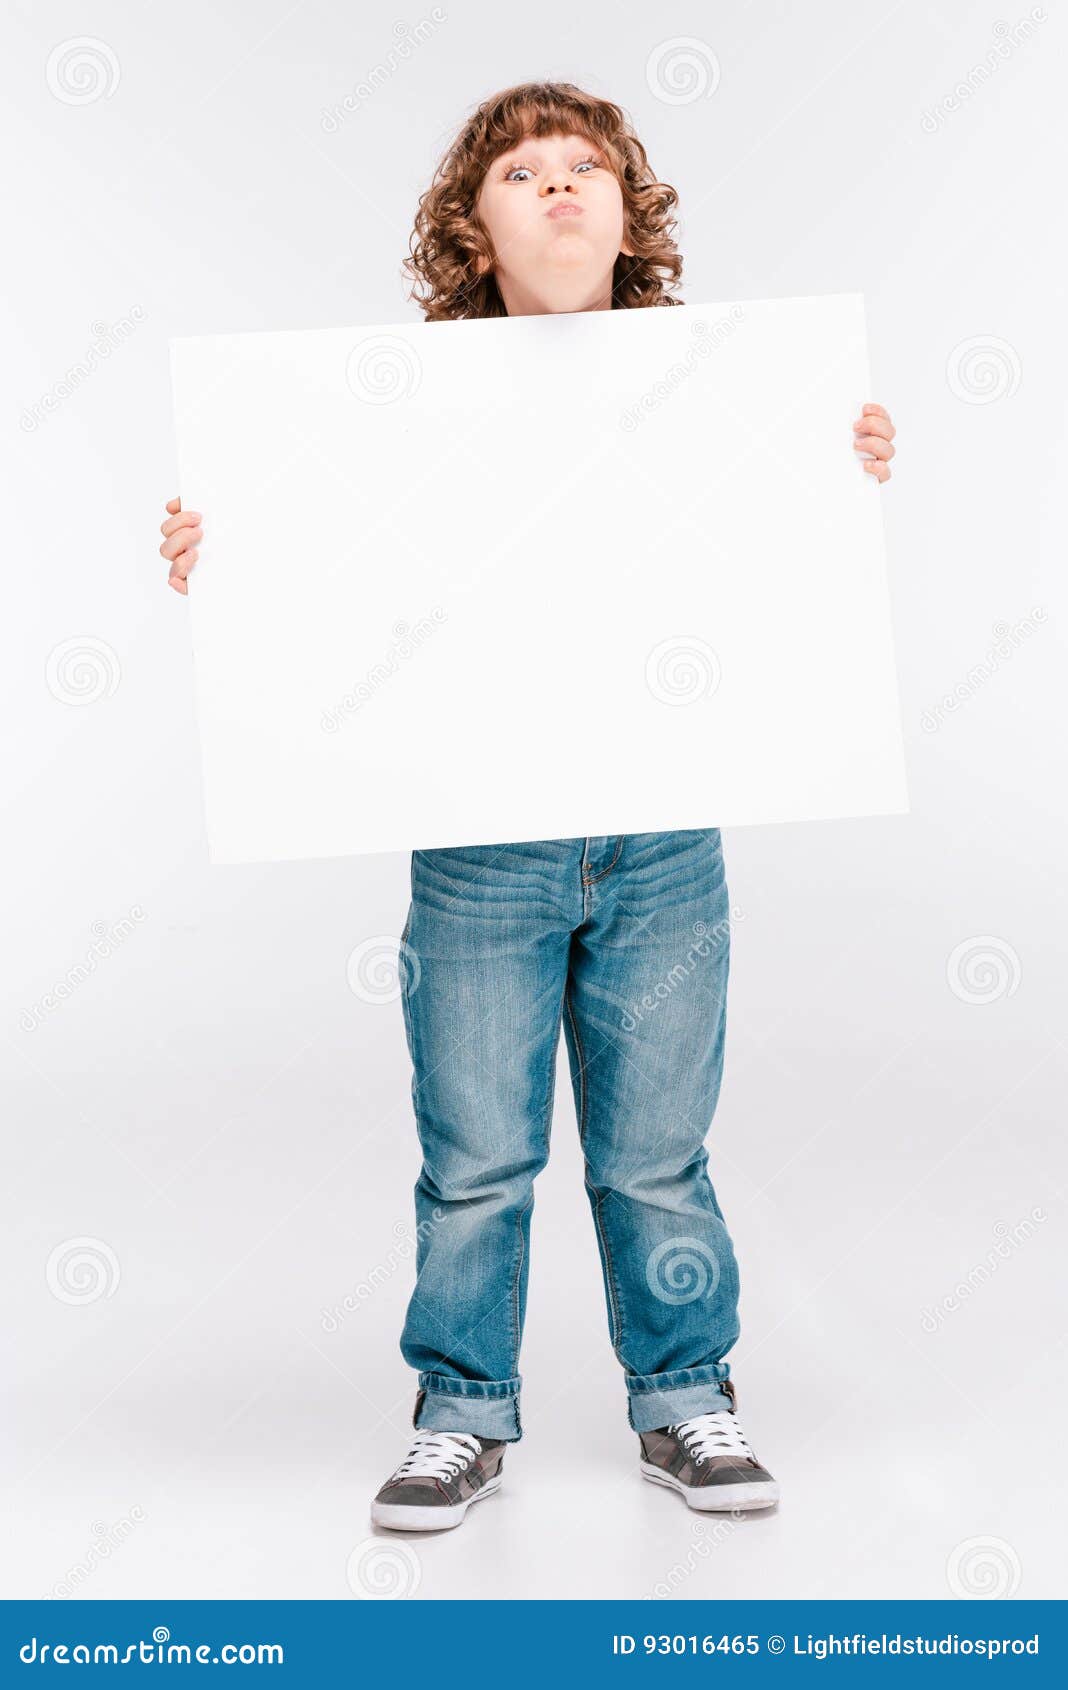 Boy Holding White Blank Board Stock Image - Image of casual, card: 93016465